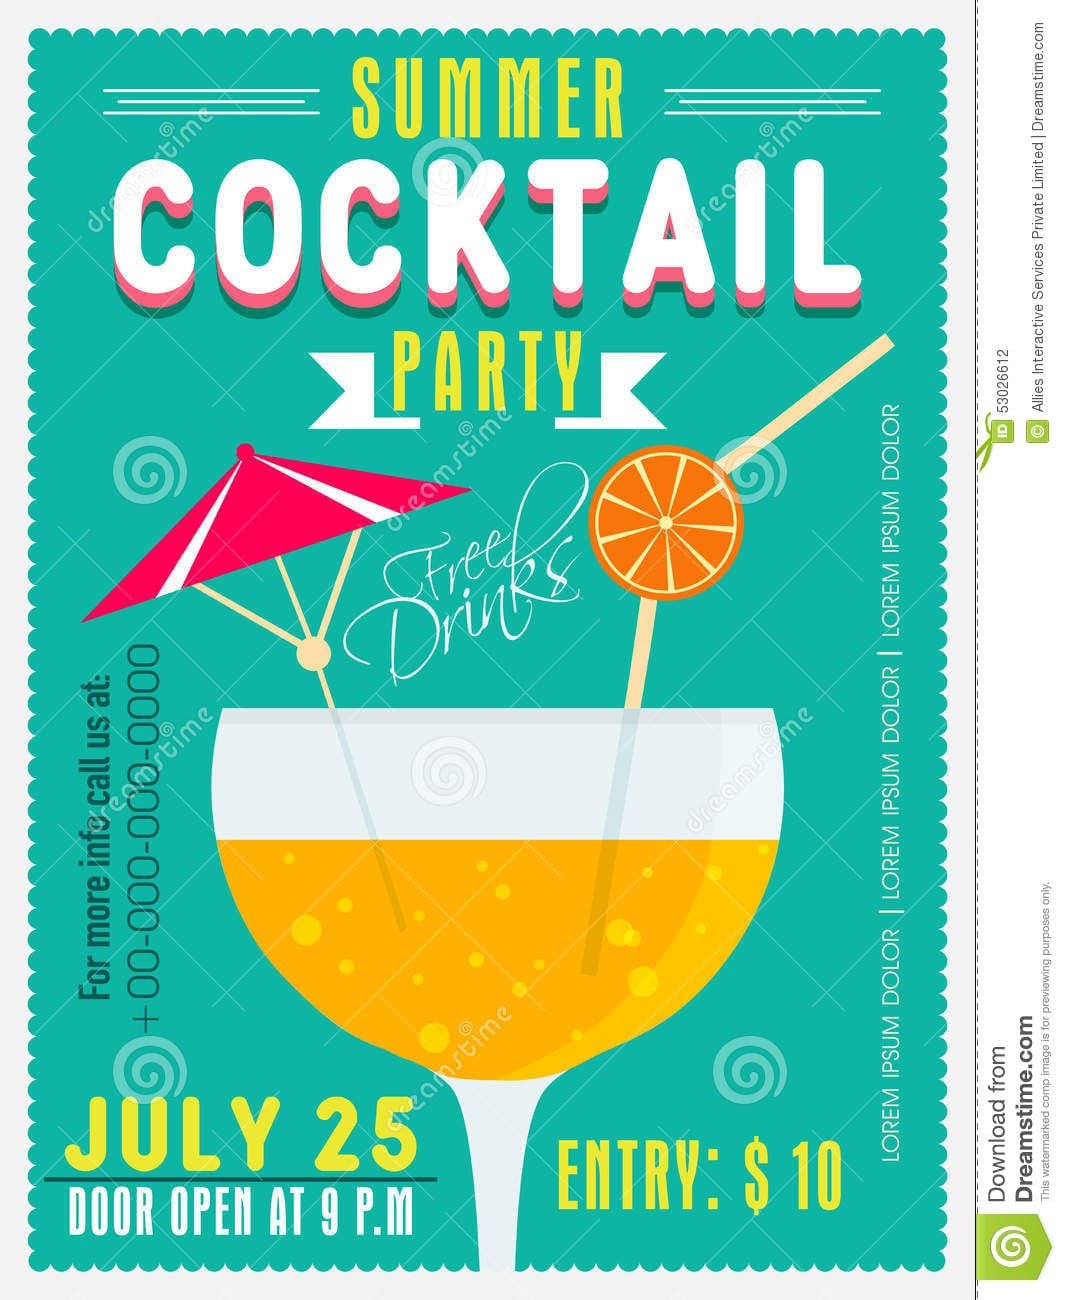 Invitation Card For Summer Cocktail Party  Stock Photo